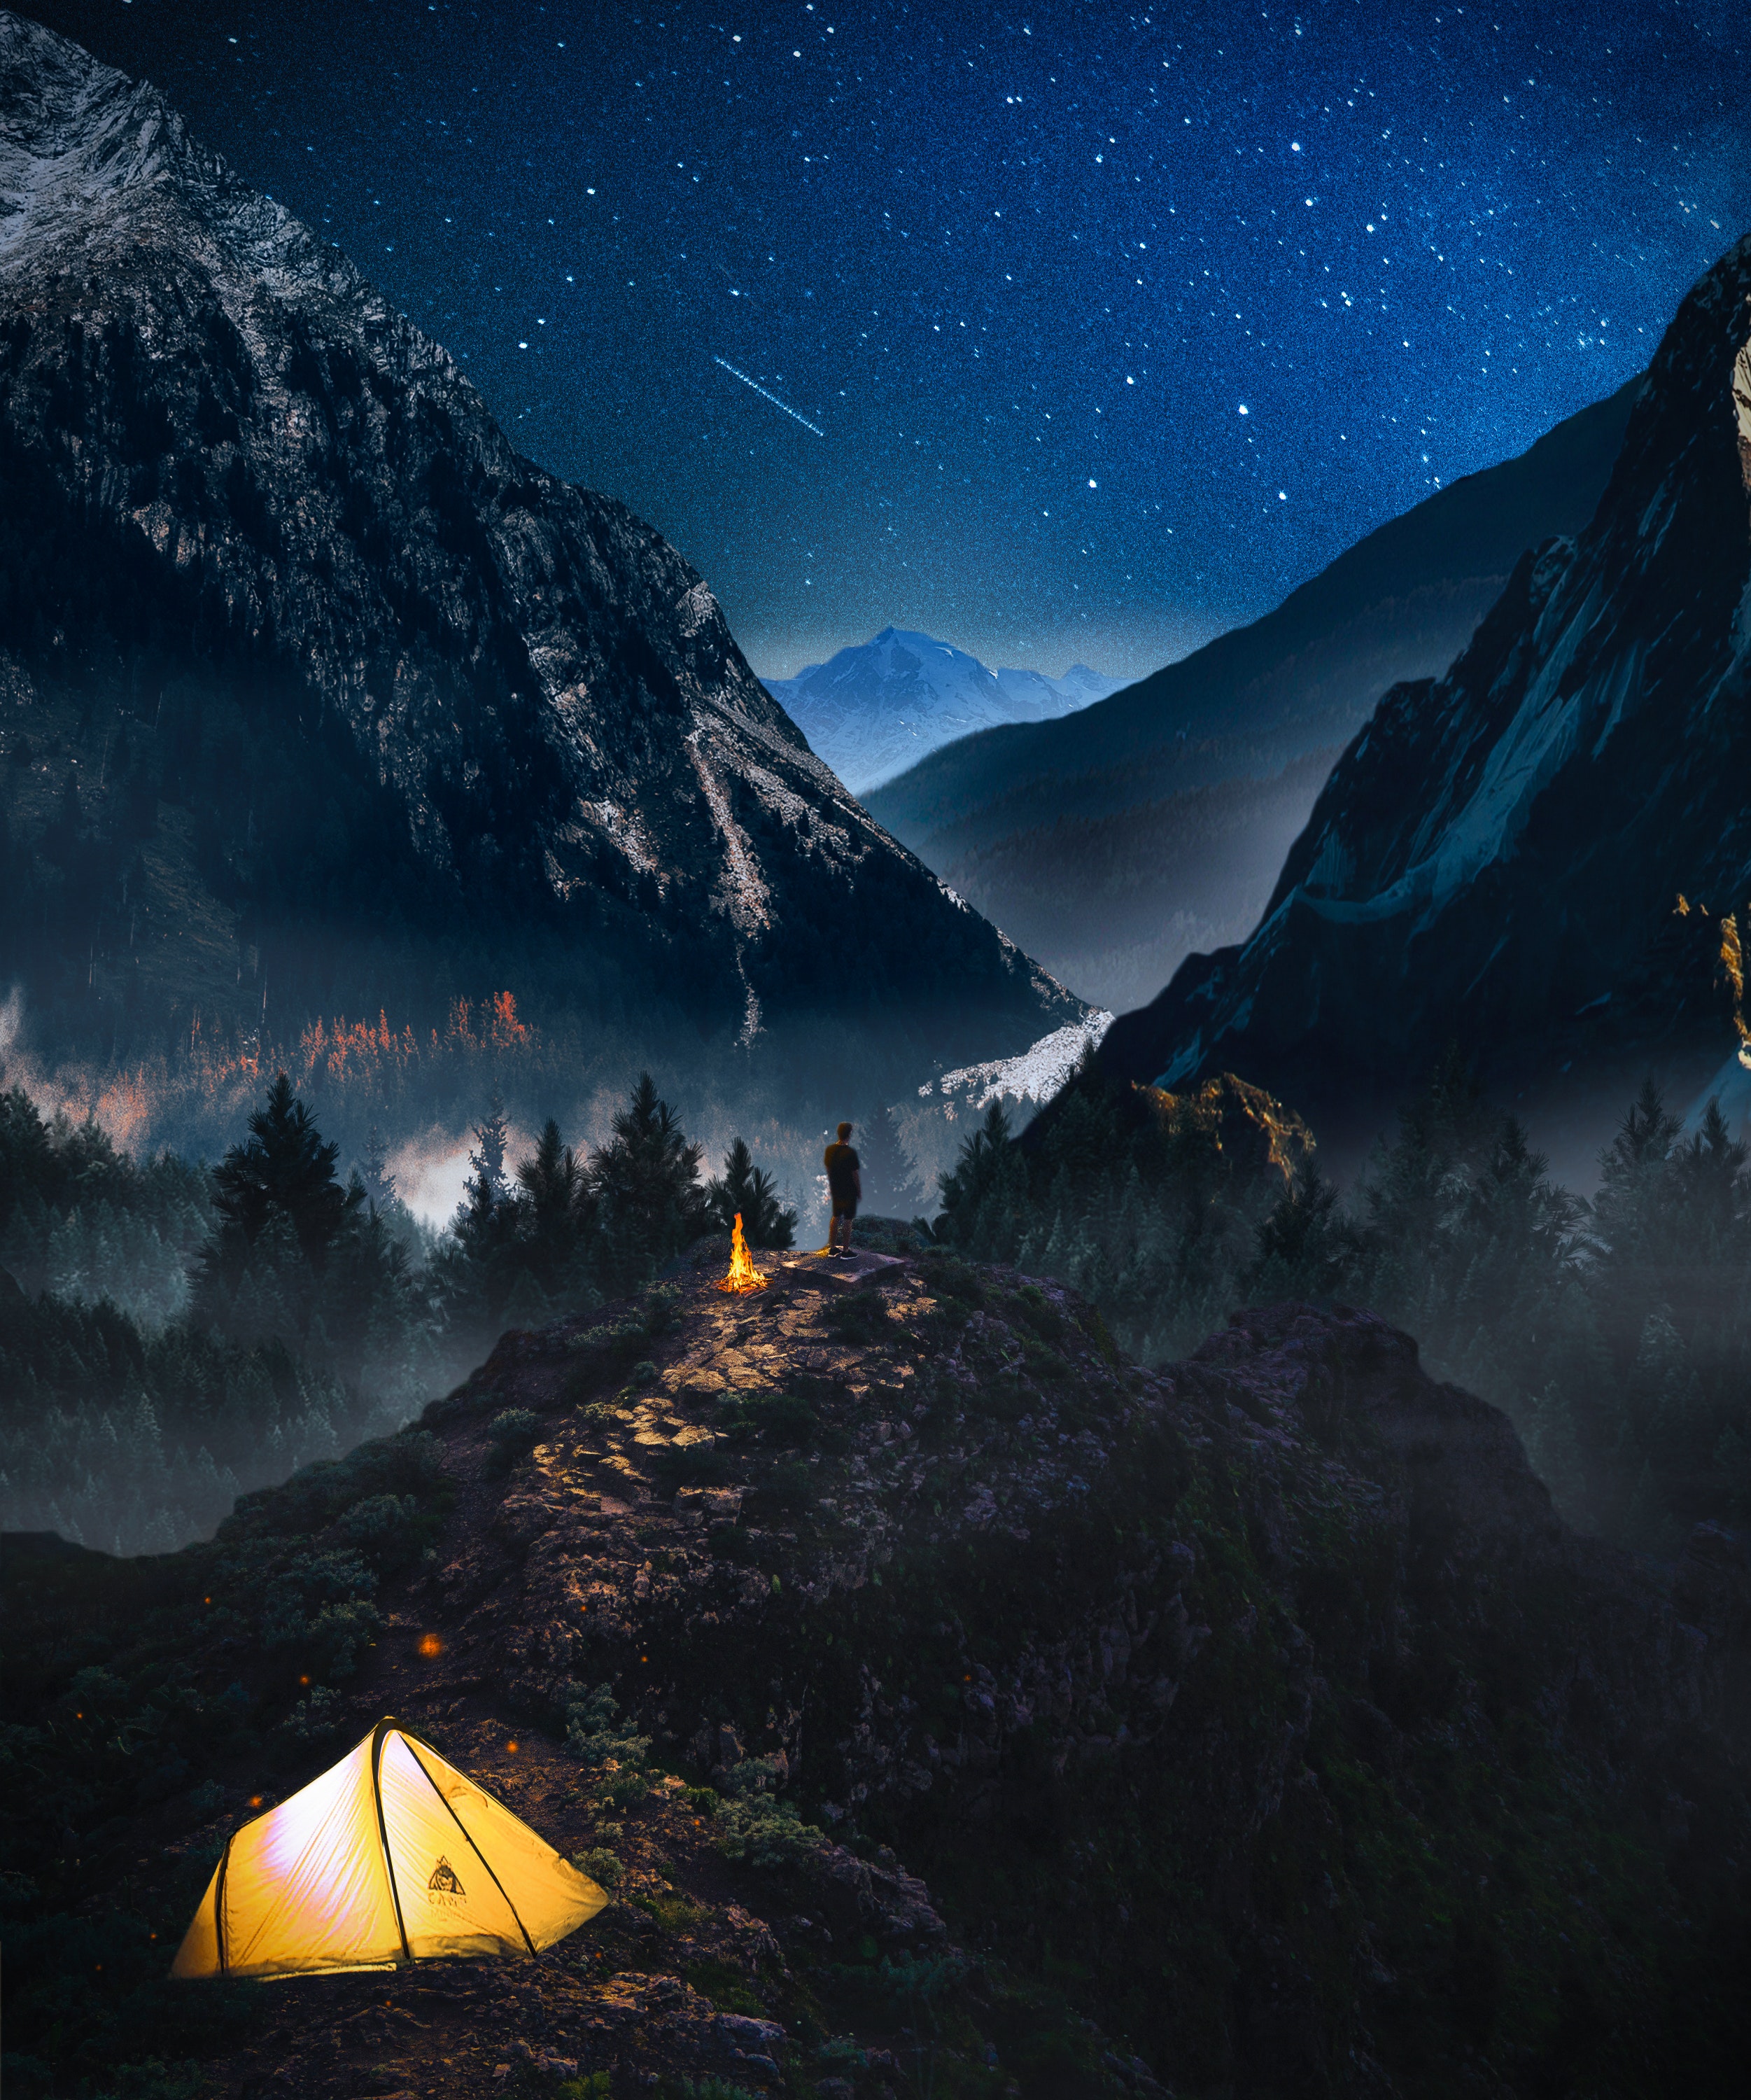 starry sky, camping, loneliness, photoshop, campsite, mountains, nature